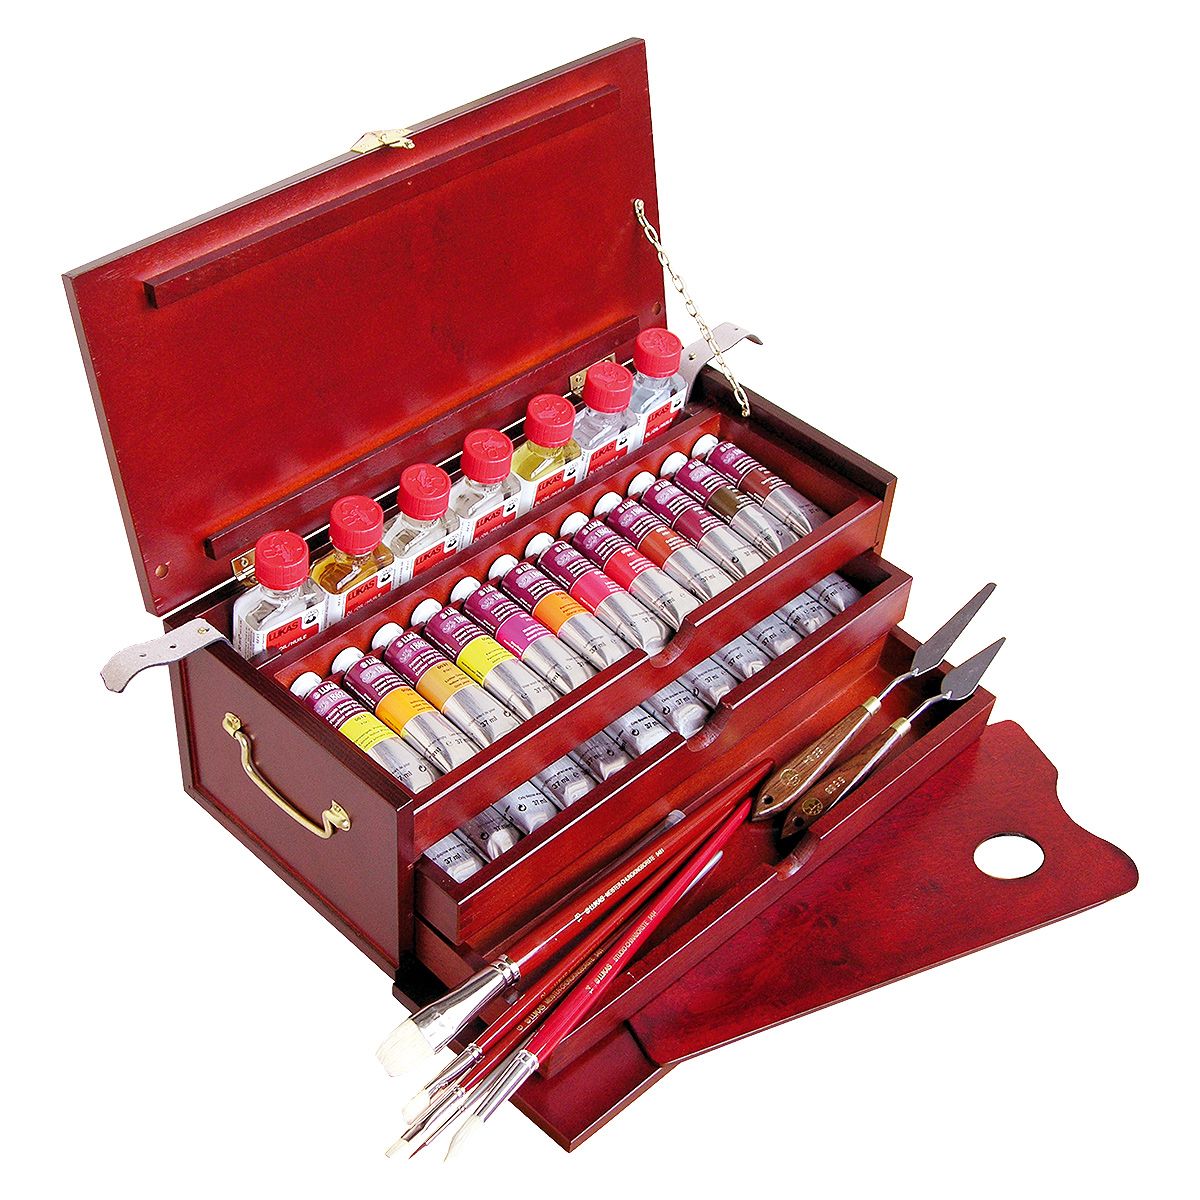 Oil Colors Deluxe Wood Box Set	